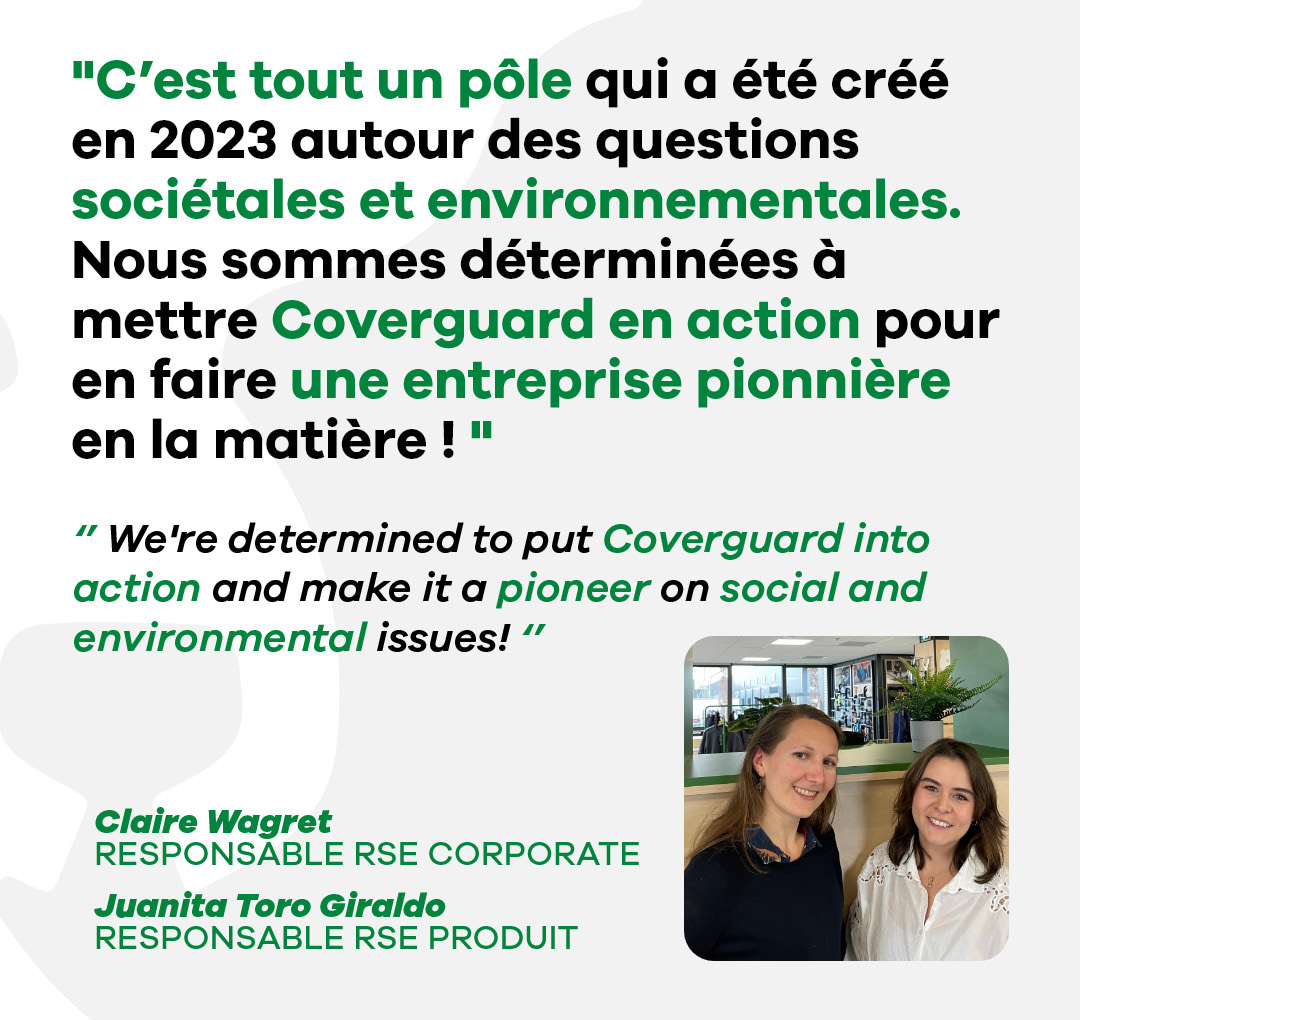 CSR at the heart of Coverguard's transformation project